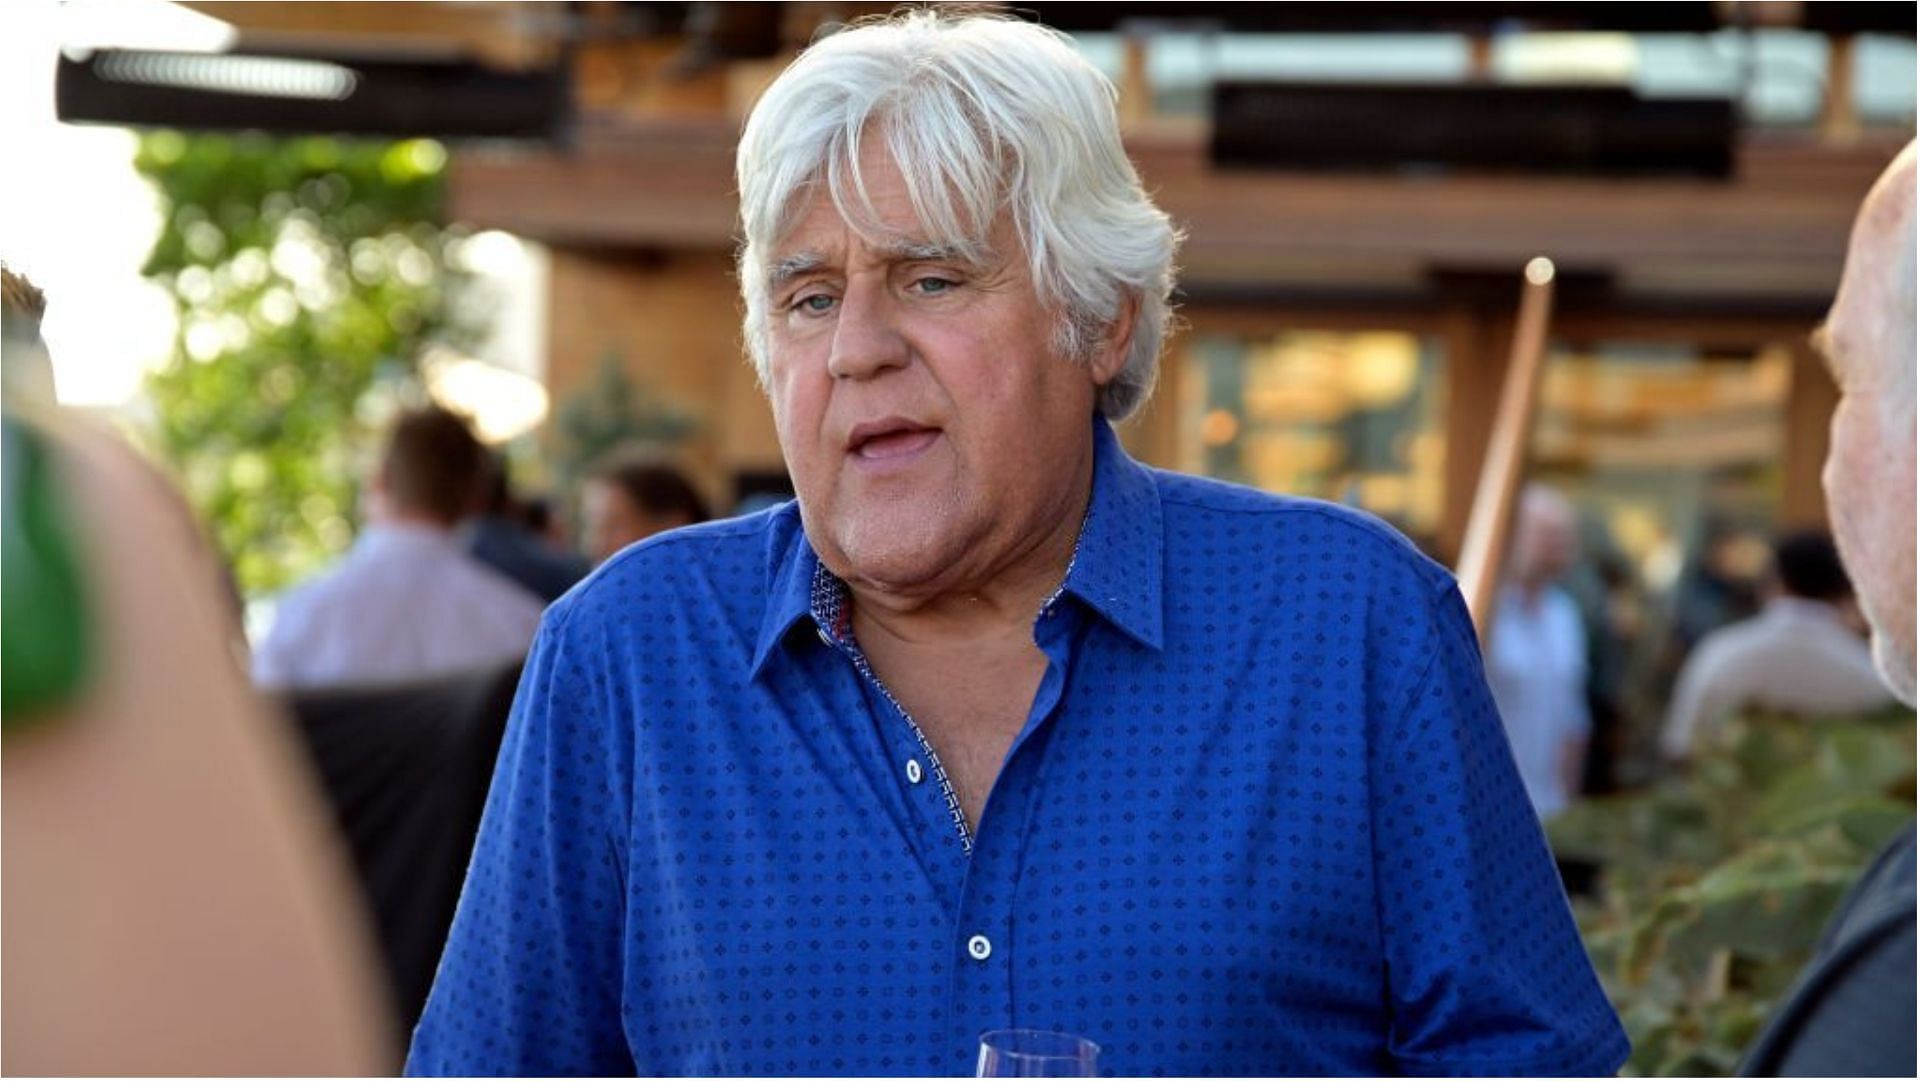 Jay Leno met with a motorcycle accident a few days ago (Image via Michael Tullberg/Getty Images)